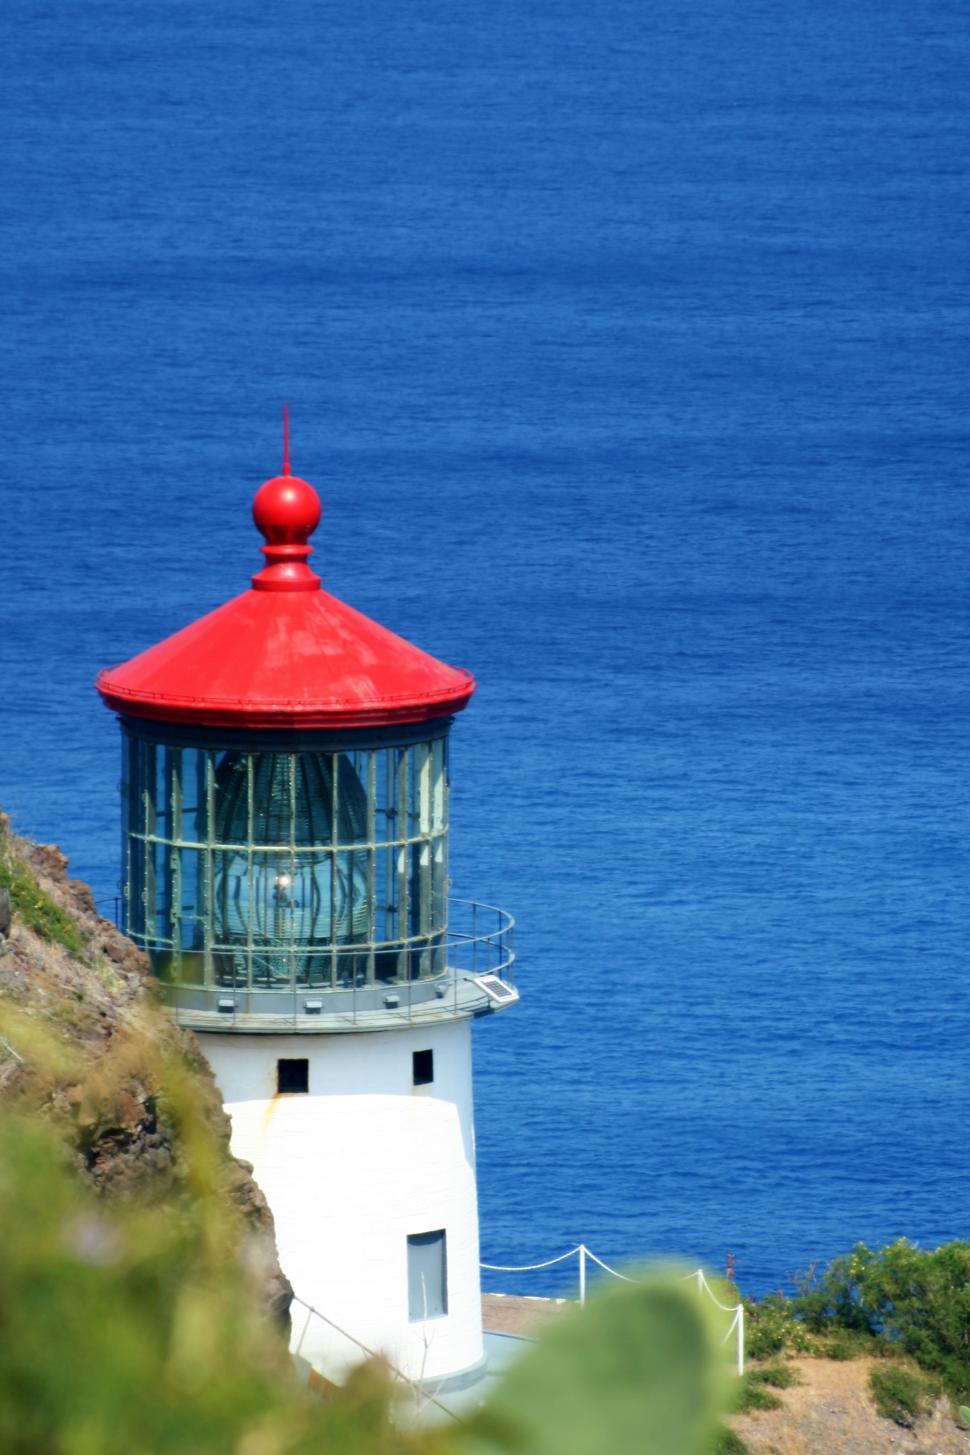 Free Image of A lighthouse on a cliff by the water 